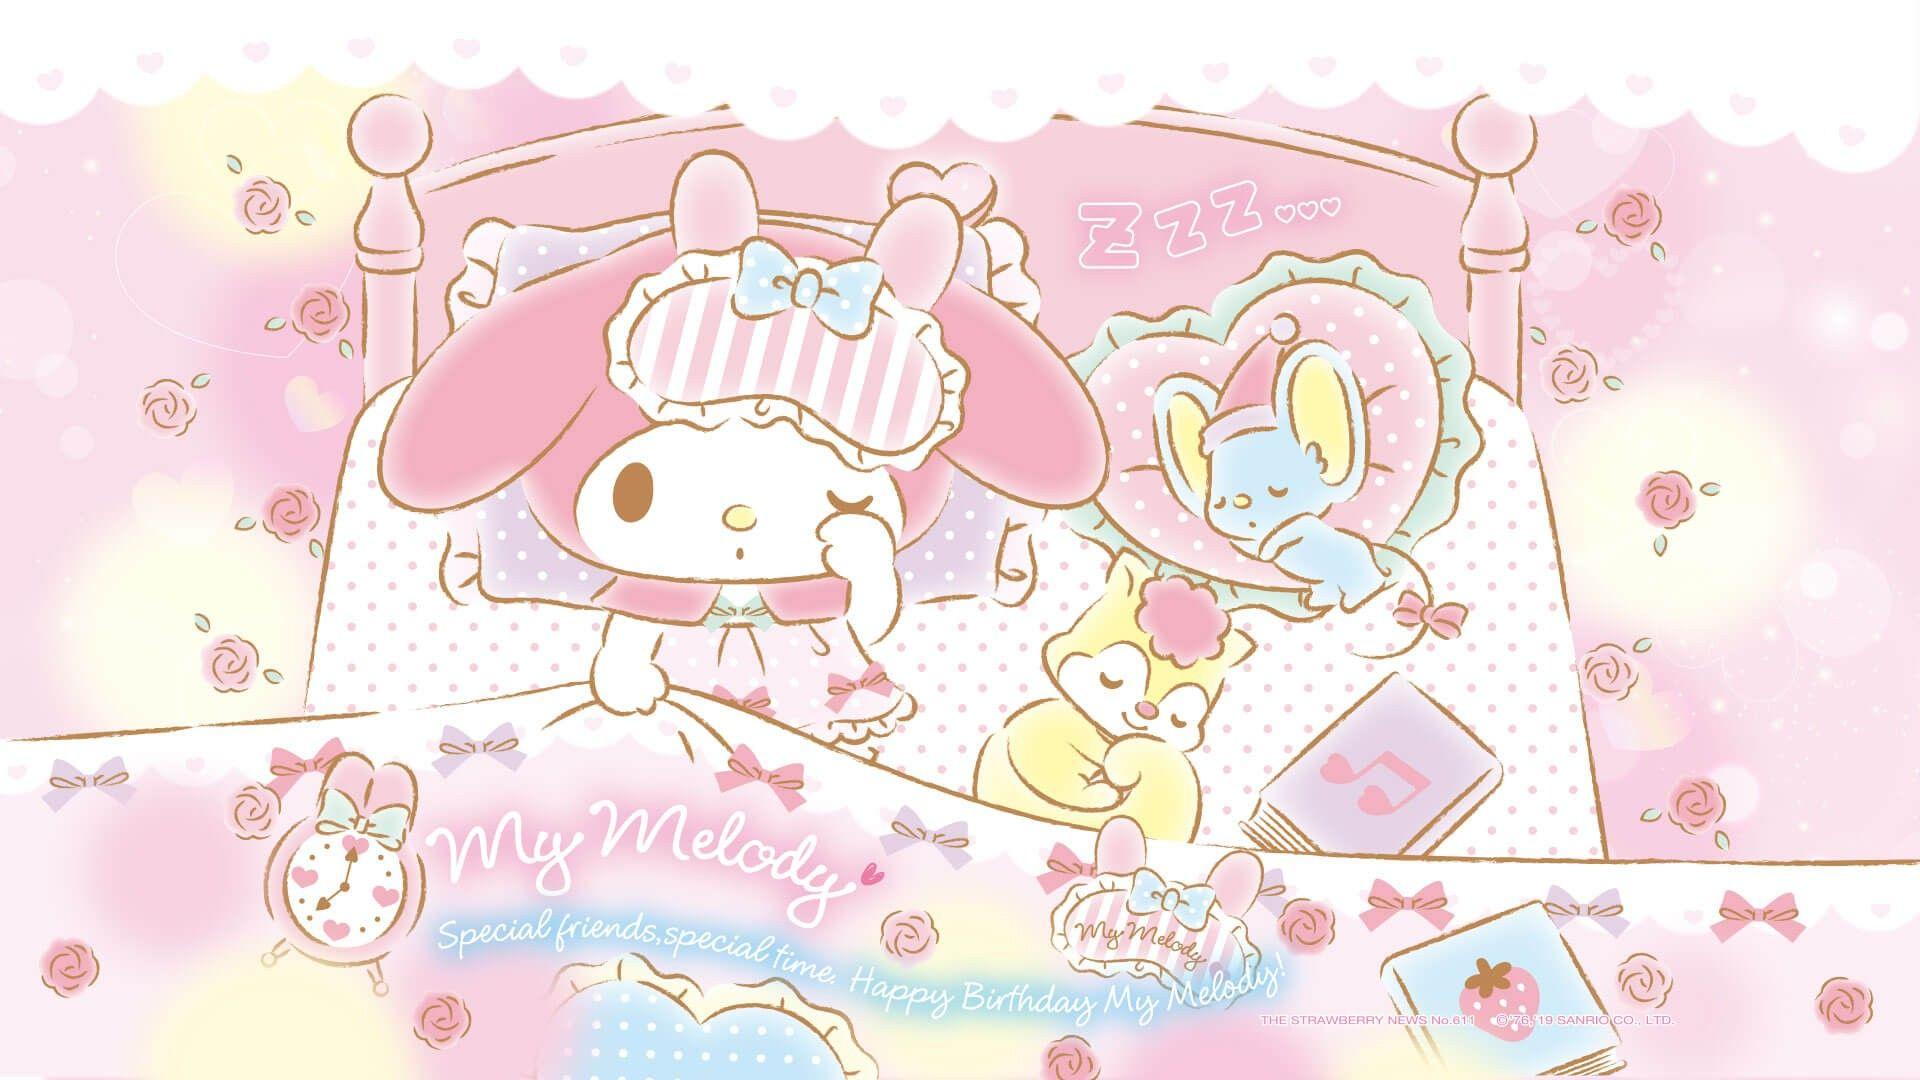 200 My Melody Wallpapers  Wallpaperscom